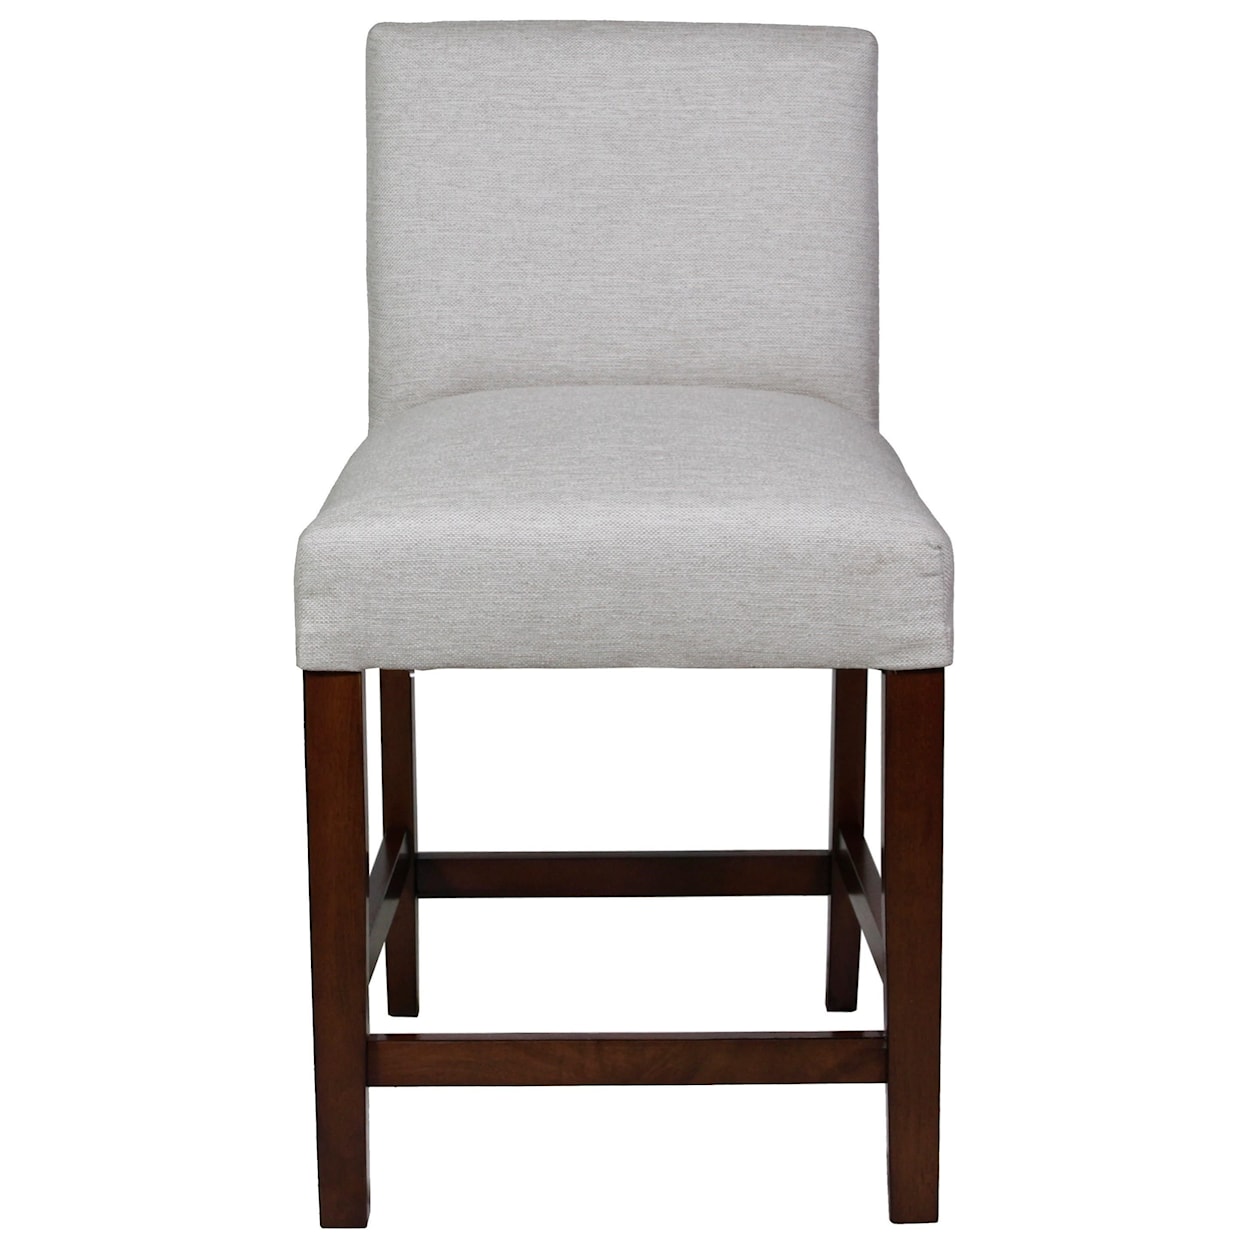 Hekman Comfort Zone Dining Kennedy Counter Stool